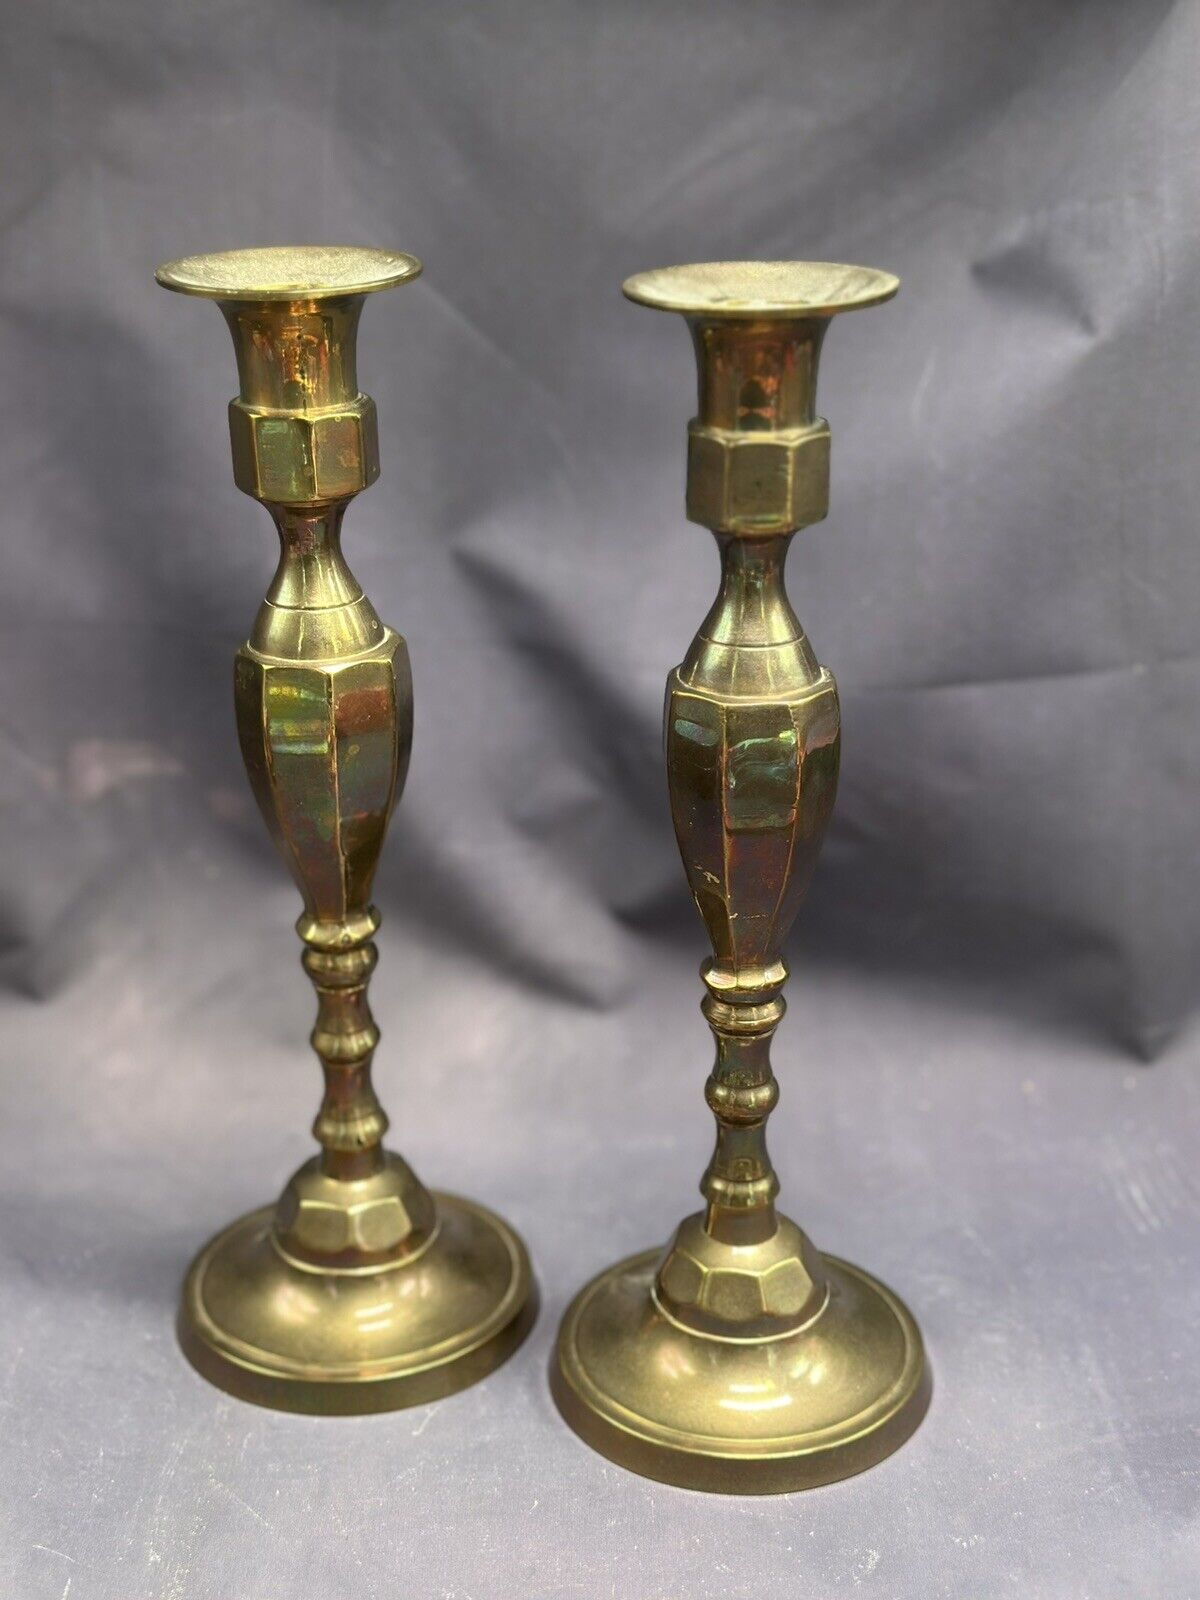 Vintage Solid Brass Hosley Pair Candlestick Holders Perfect Patina India